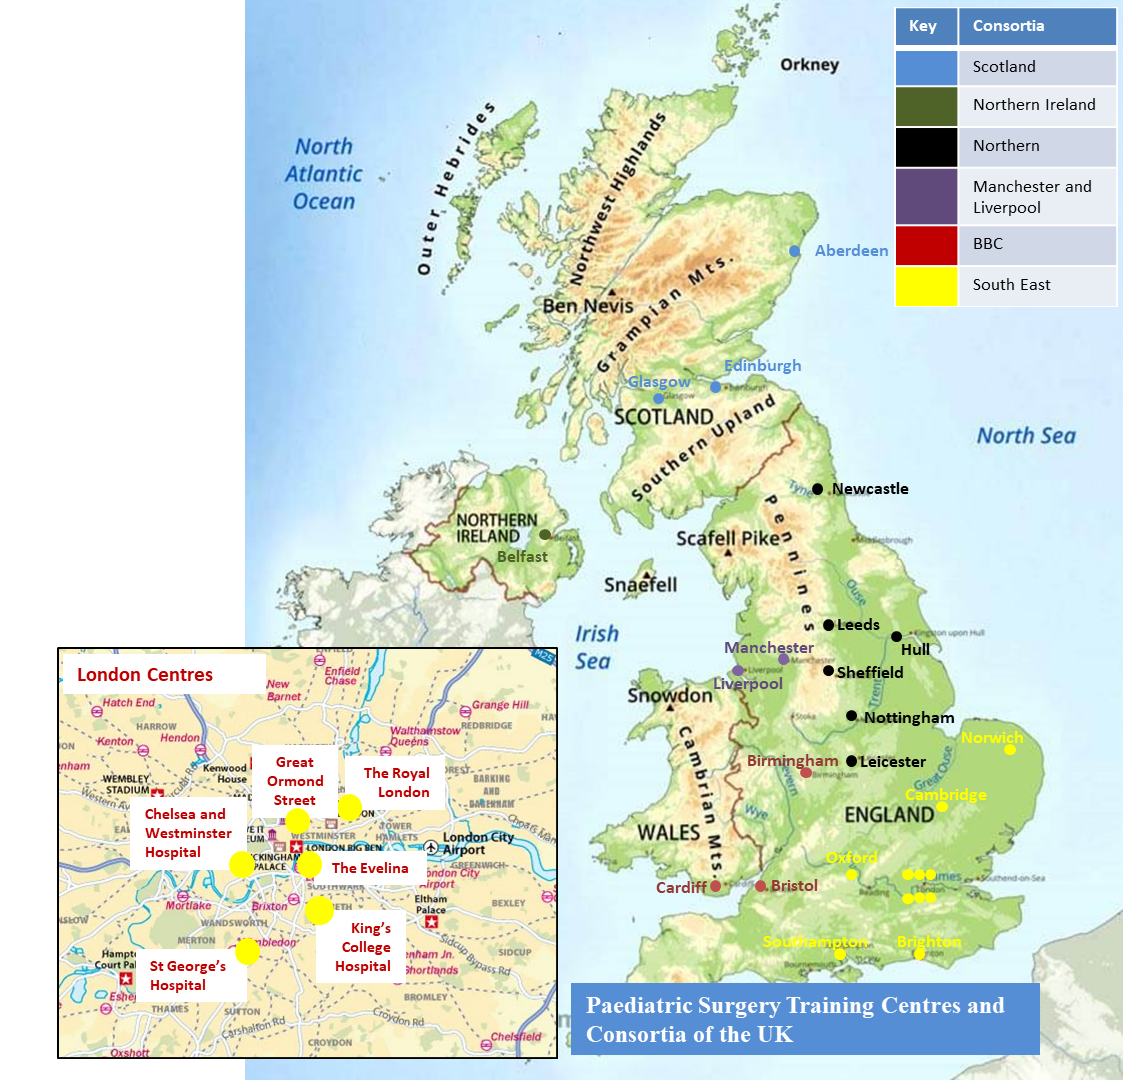 Map of UK Paediatric Training Centres and their consortia